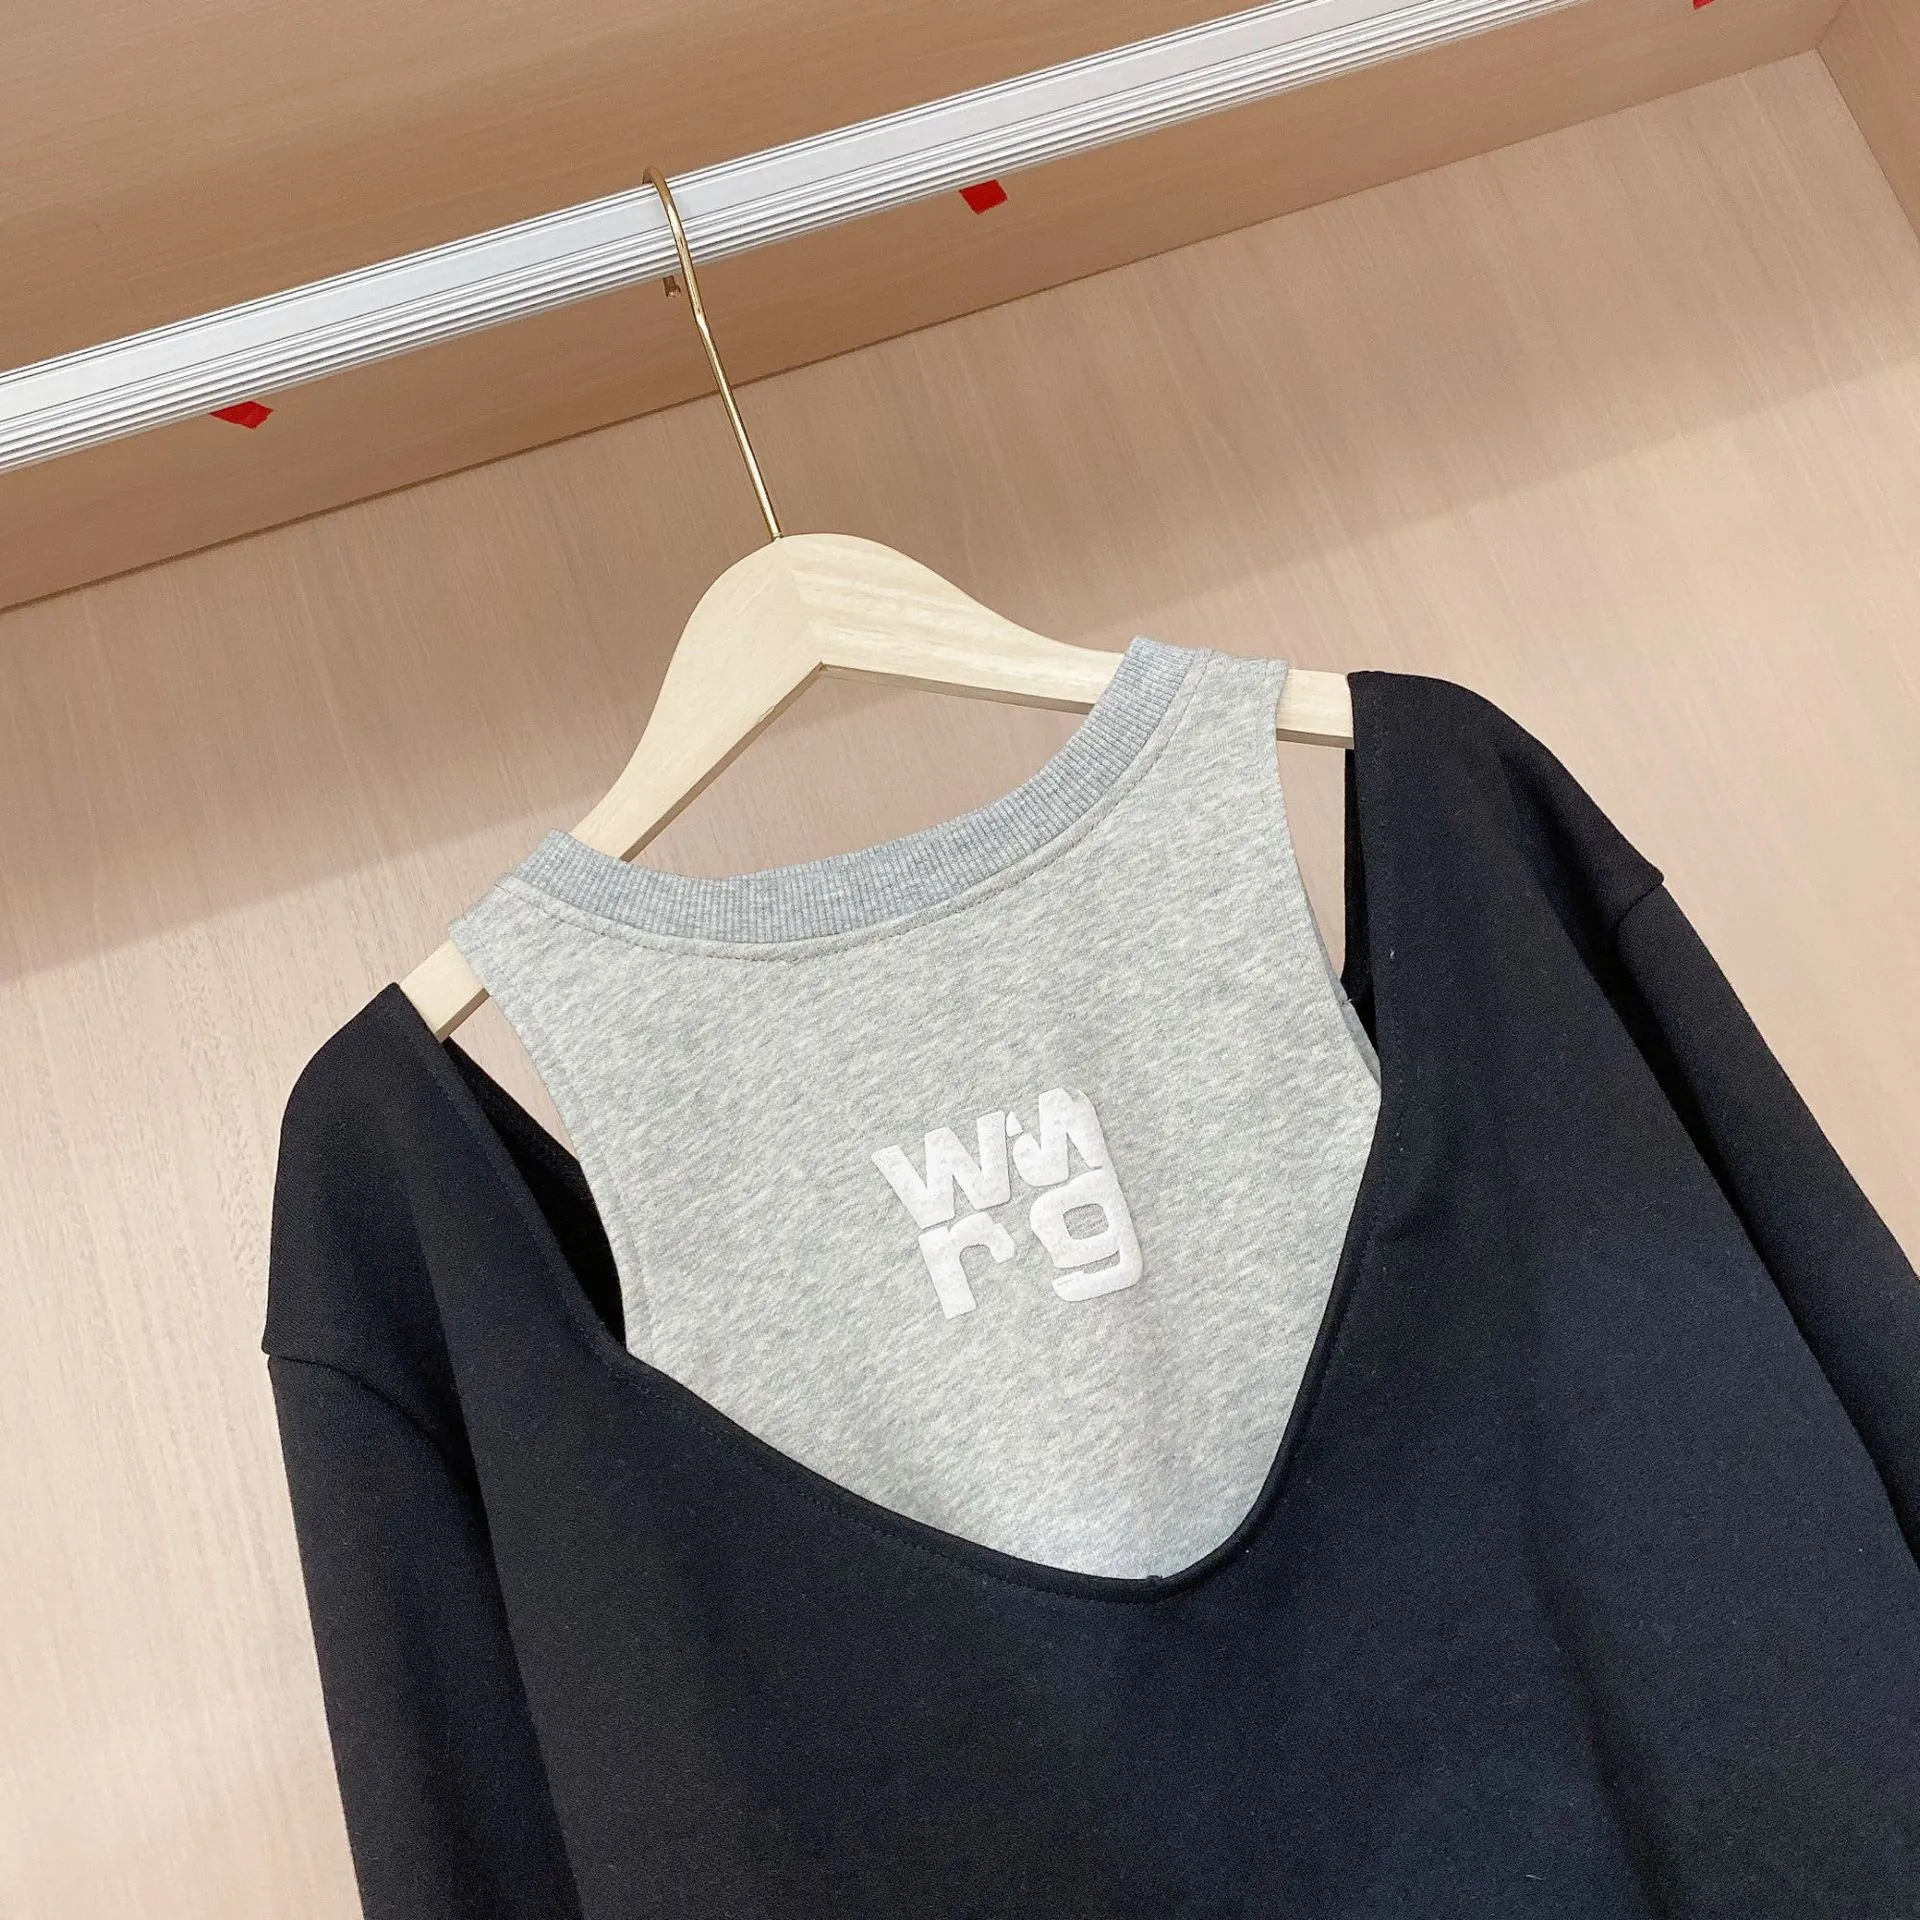 2021 New Style Strapless Letters Long-Sleeved Women's T-Shirt Early Autumn Style Stitching Fake Two-Piece Sweater Loose Top B021 vintage tees